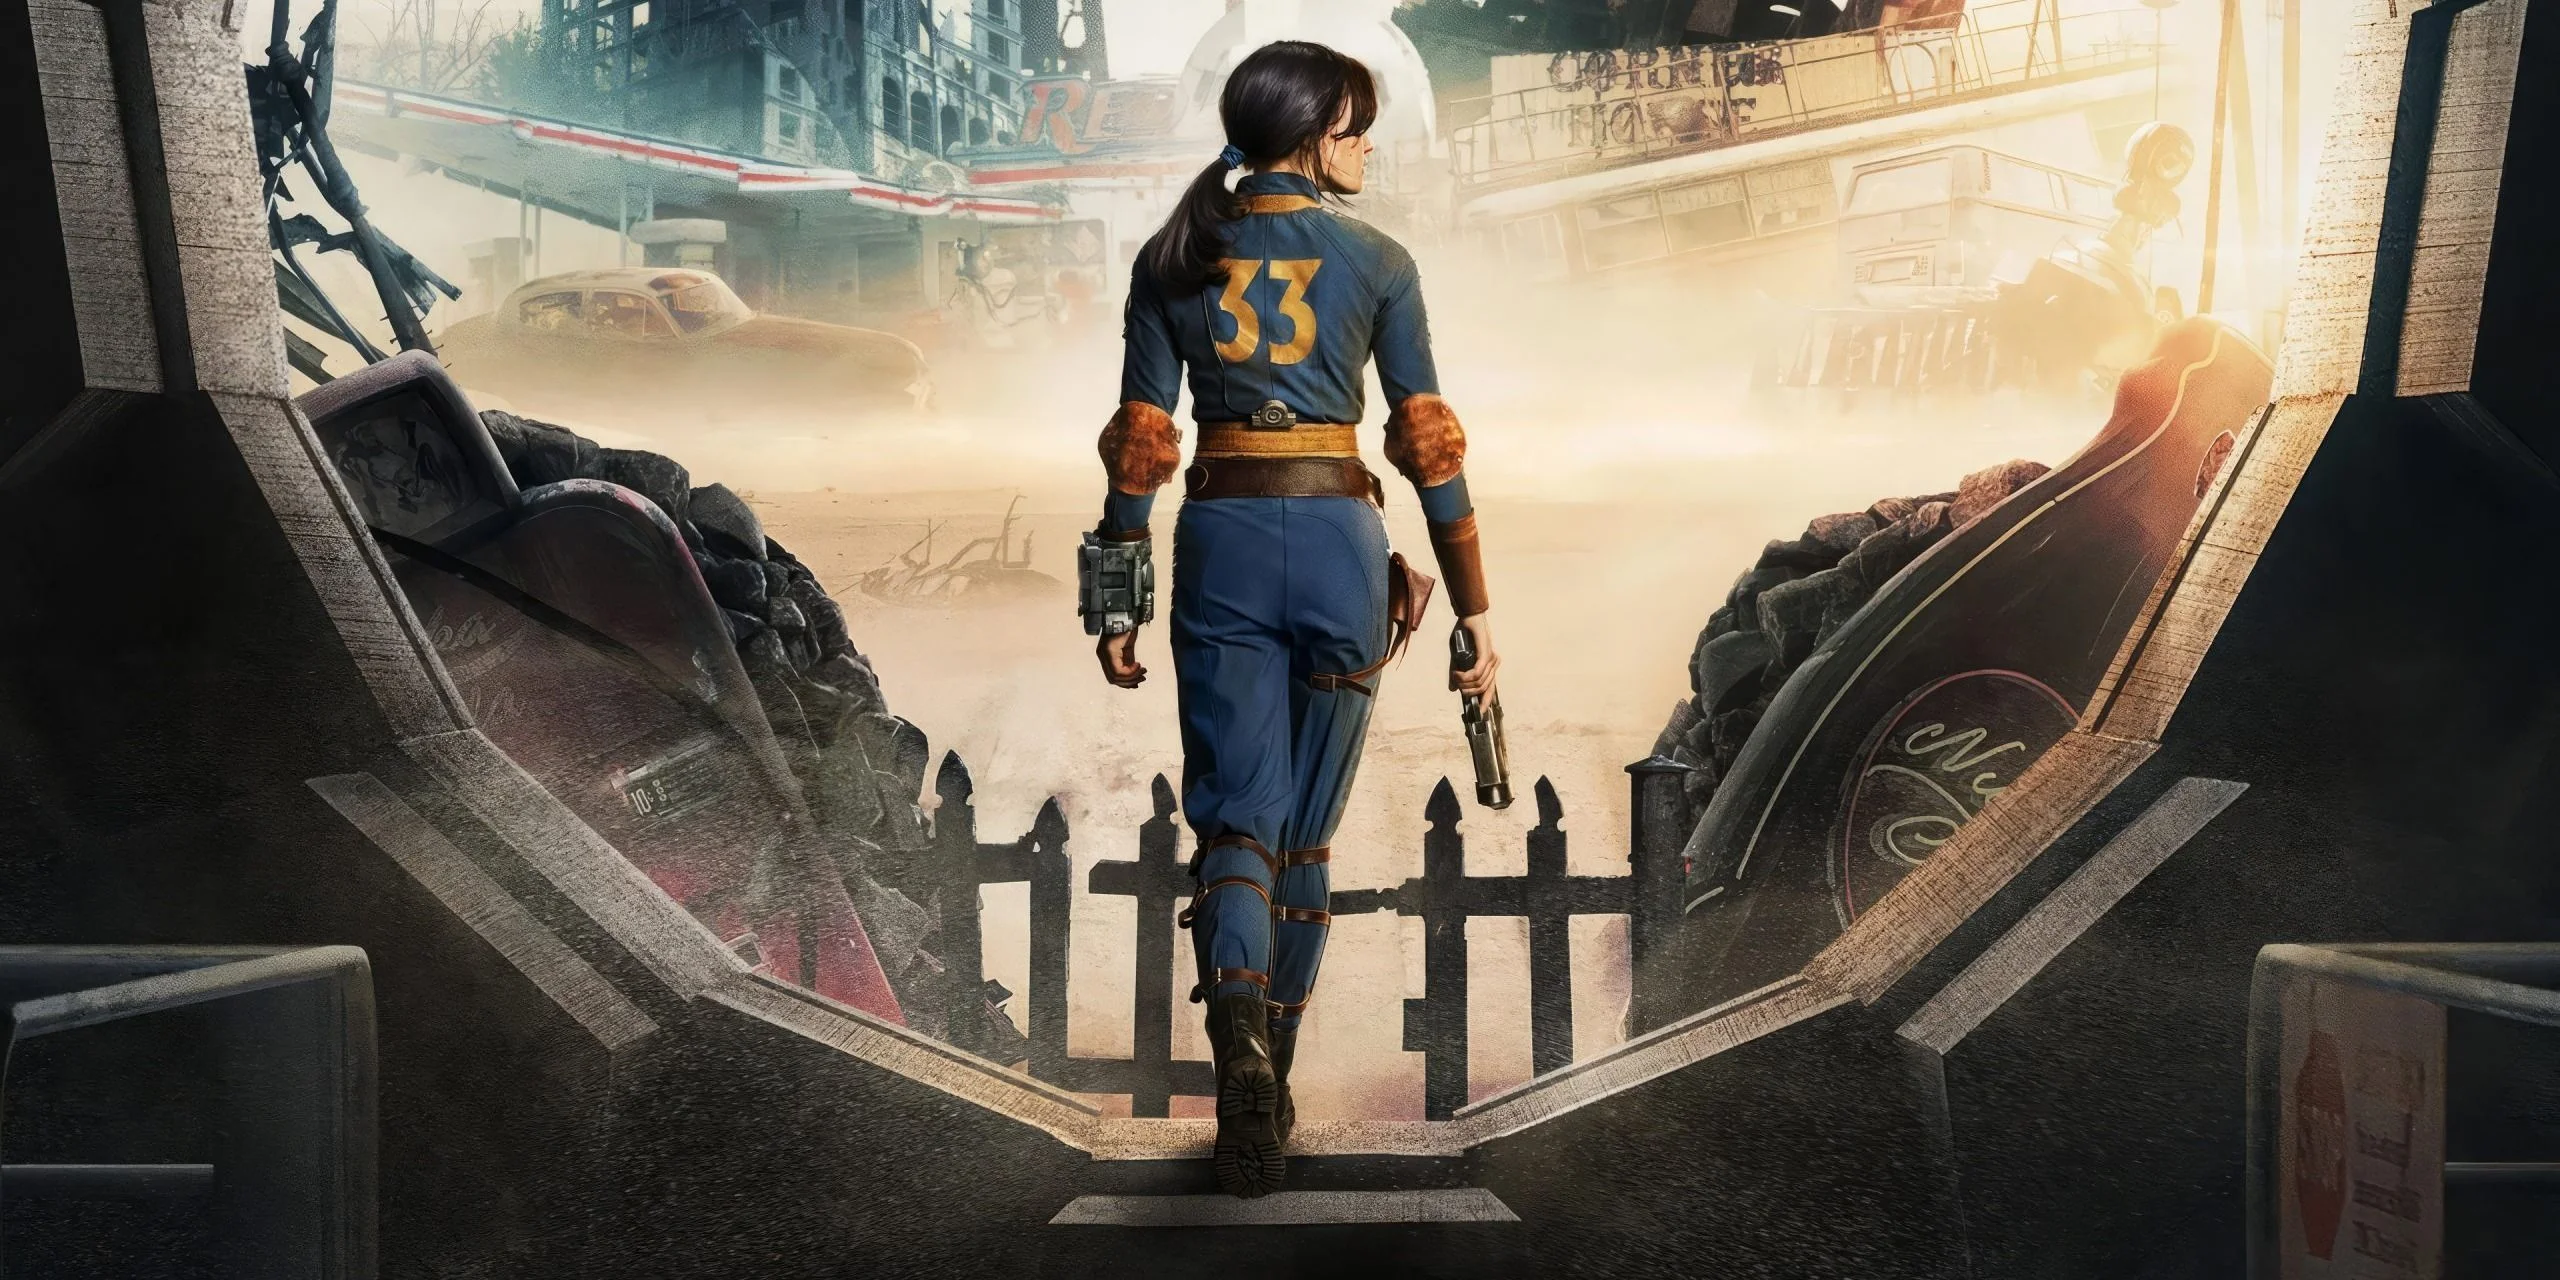 A new trailer and footage of the upcoming Fallout series have been released